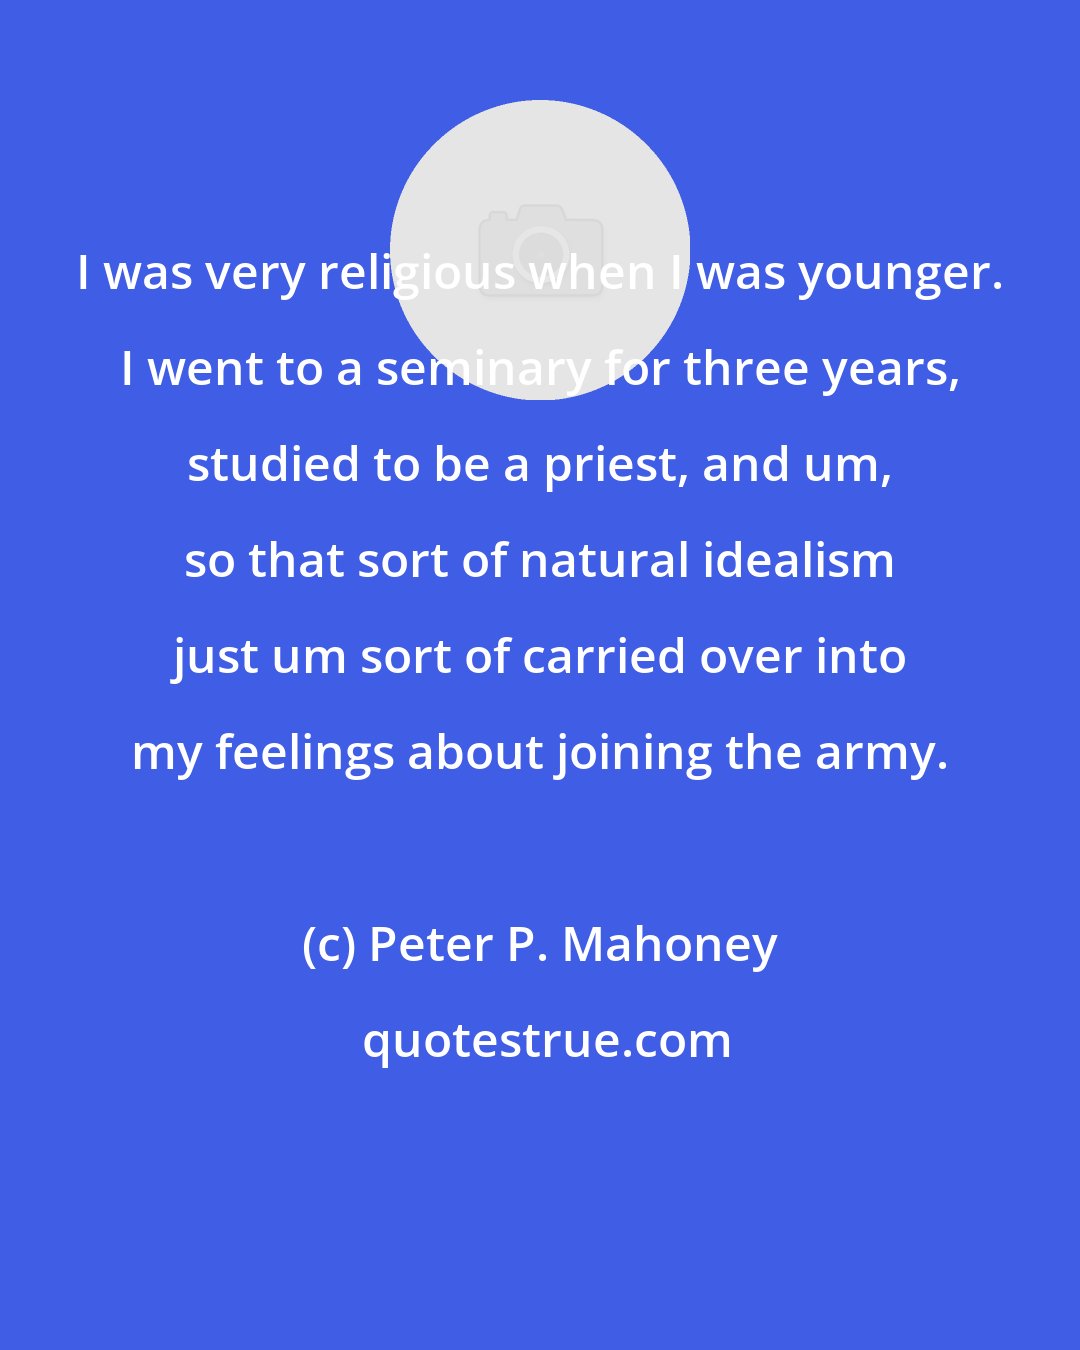 Peter P. Mahoney: I was very religious when I was younger. I went to a seminary for three years, studied to be a priest, and um, so that sort of natural idealism just um sort of carried over into my feelings about joining the army.